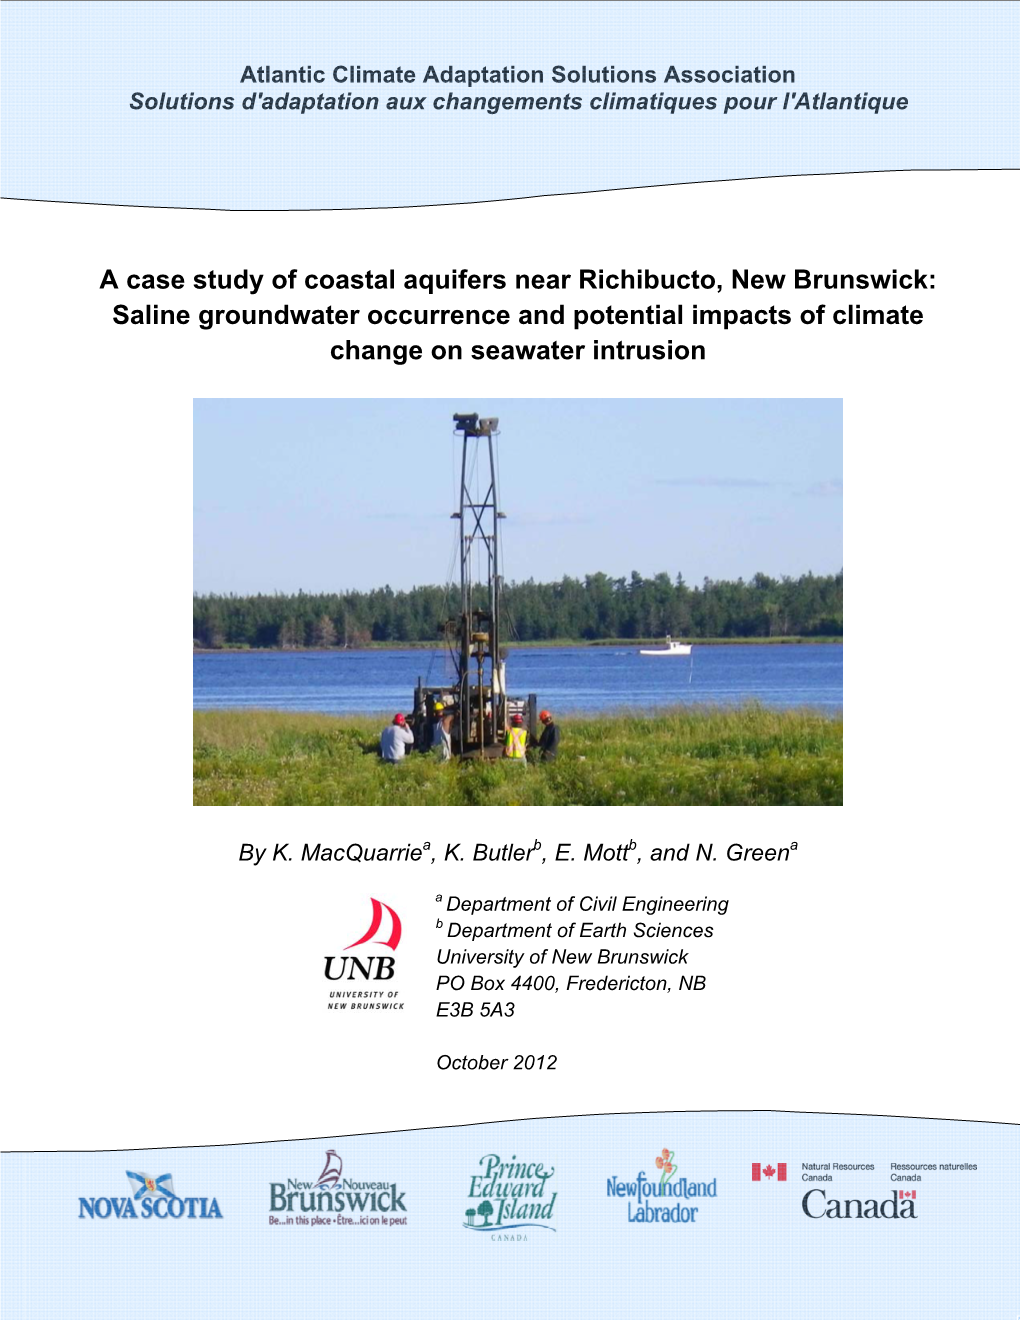 A Case Study of Coastal Aquifers Near Richibucto, New Brunswick: Saline Groundwater Occurrence and Potential Impacts of Climate Change on Seawater Intrusion